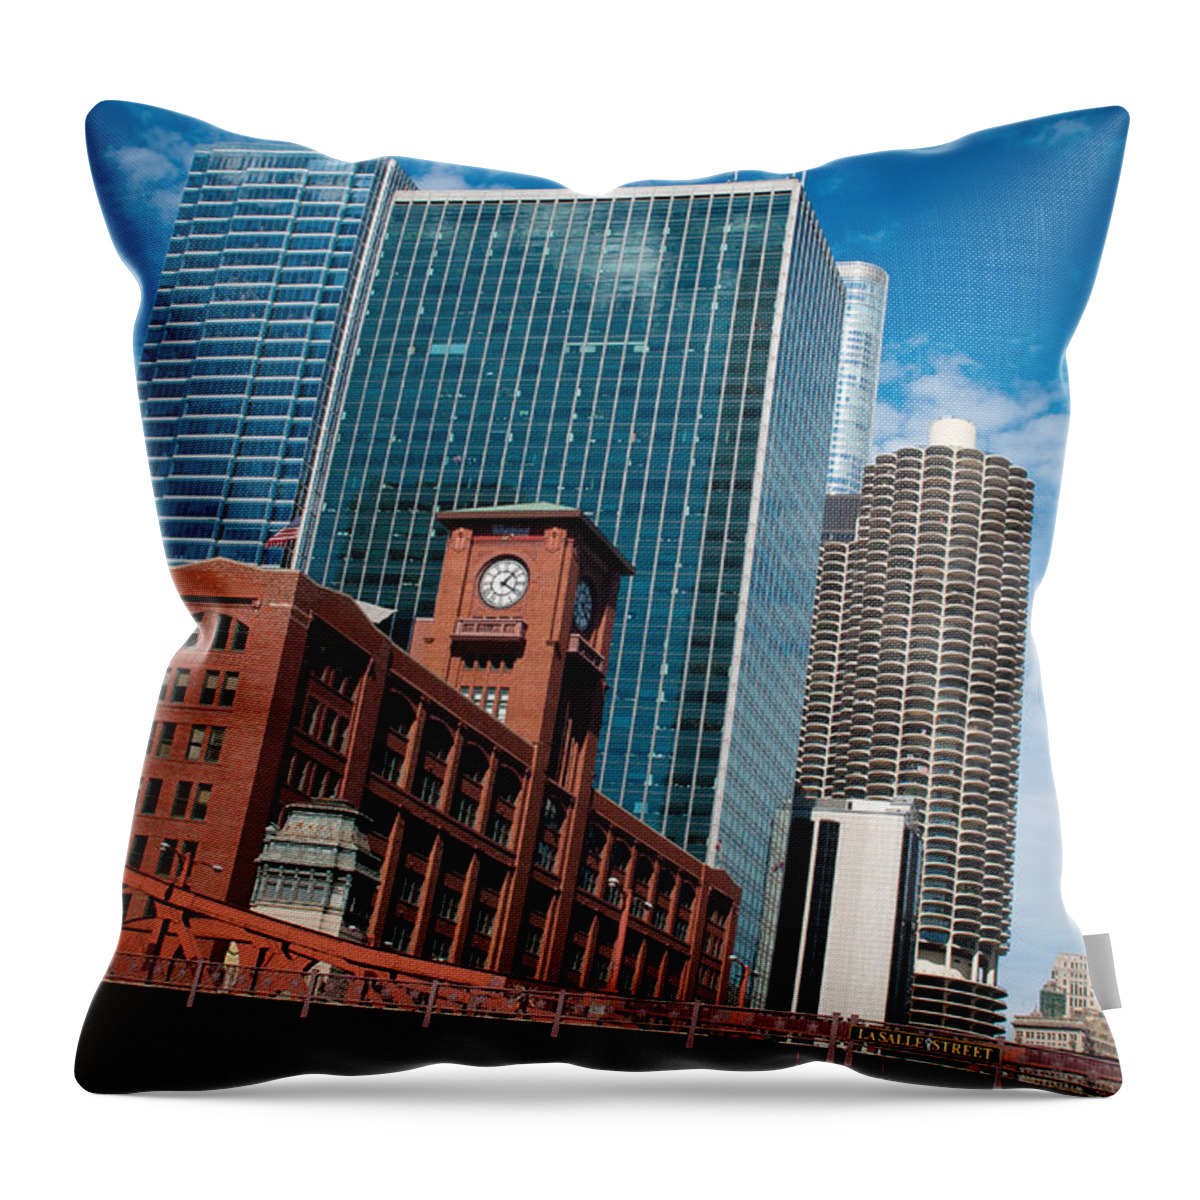 Park Towers Chicago Throw Pillow featuring the photograph Park Towers Chicago by Dejan Jovanovic